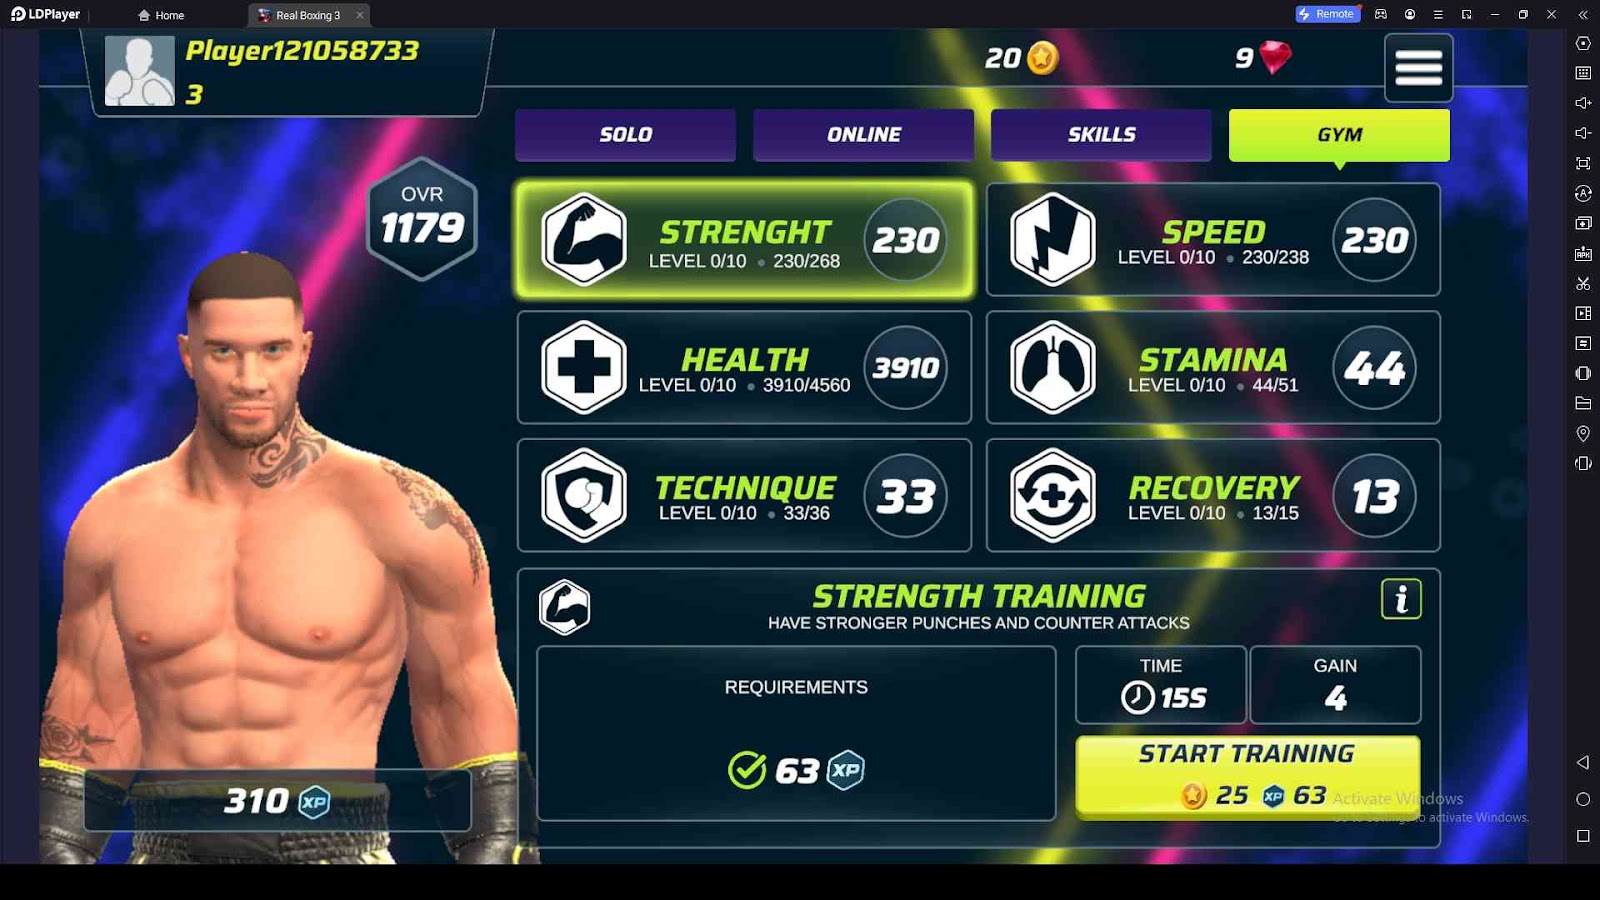 Go to the Gym and Train Your Fighter in Real Boxing 3